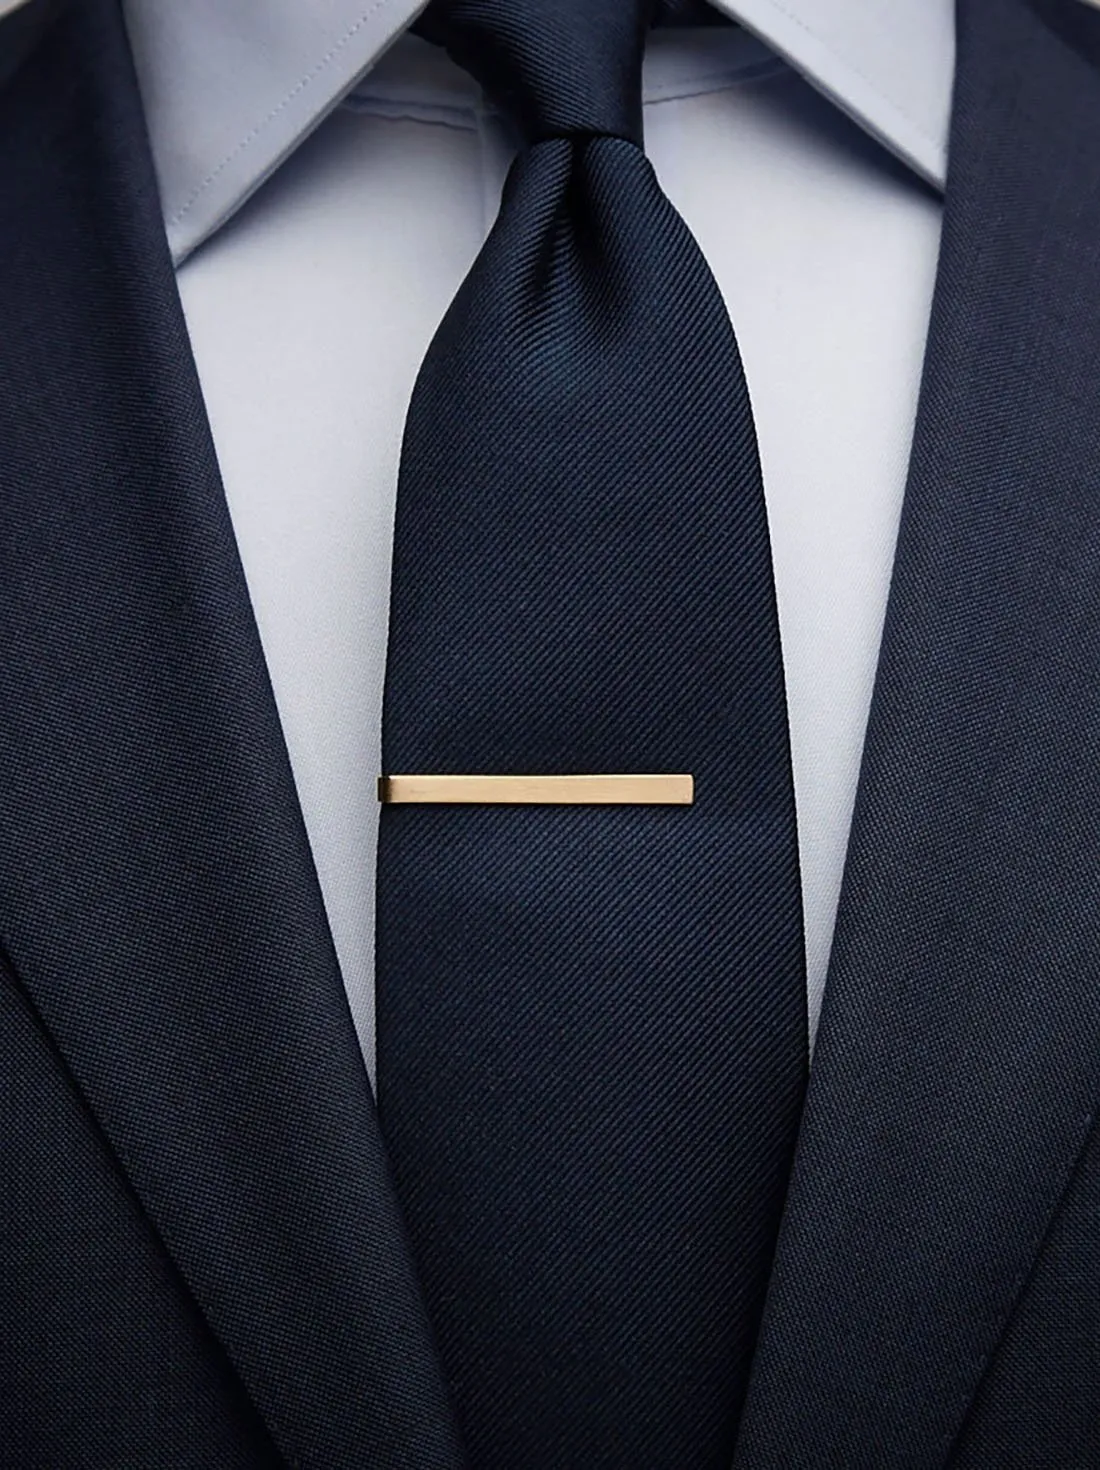 Gold Tie Clip Isaac